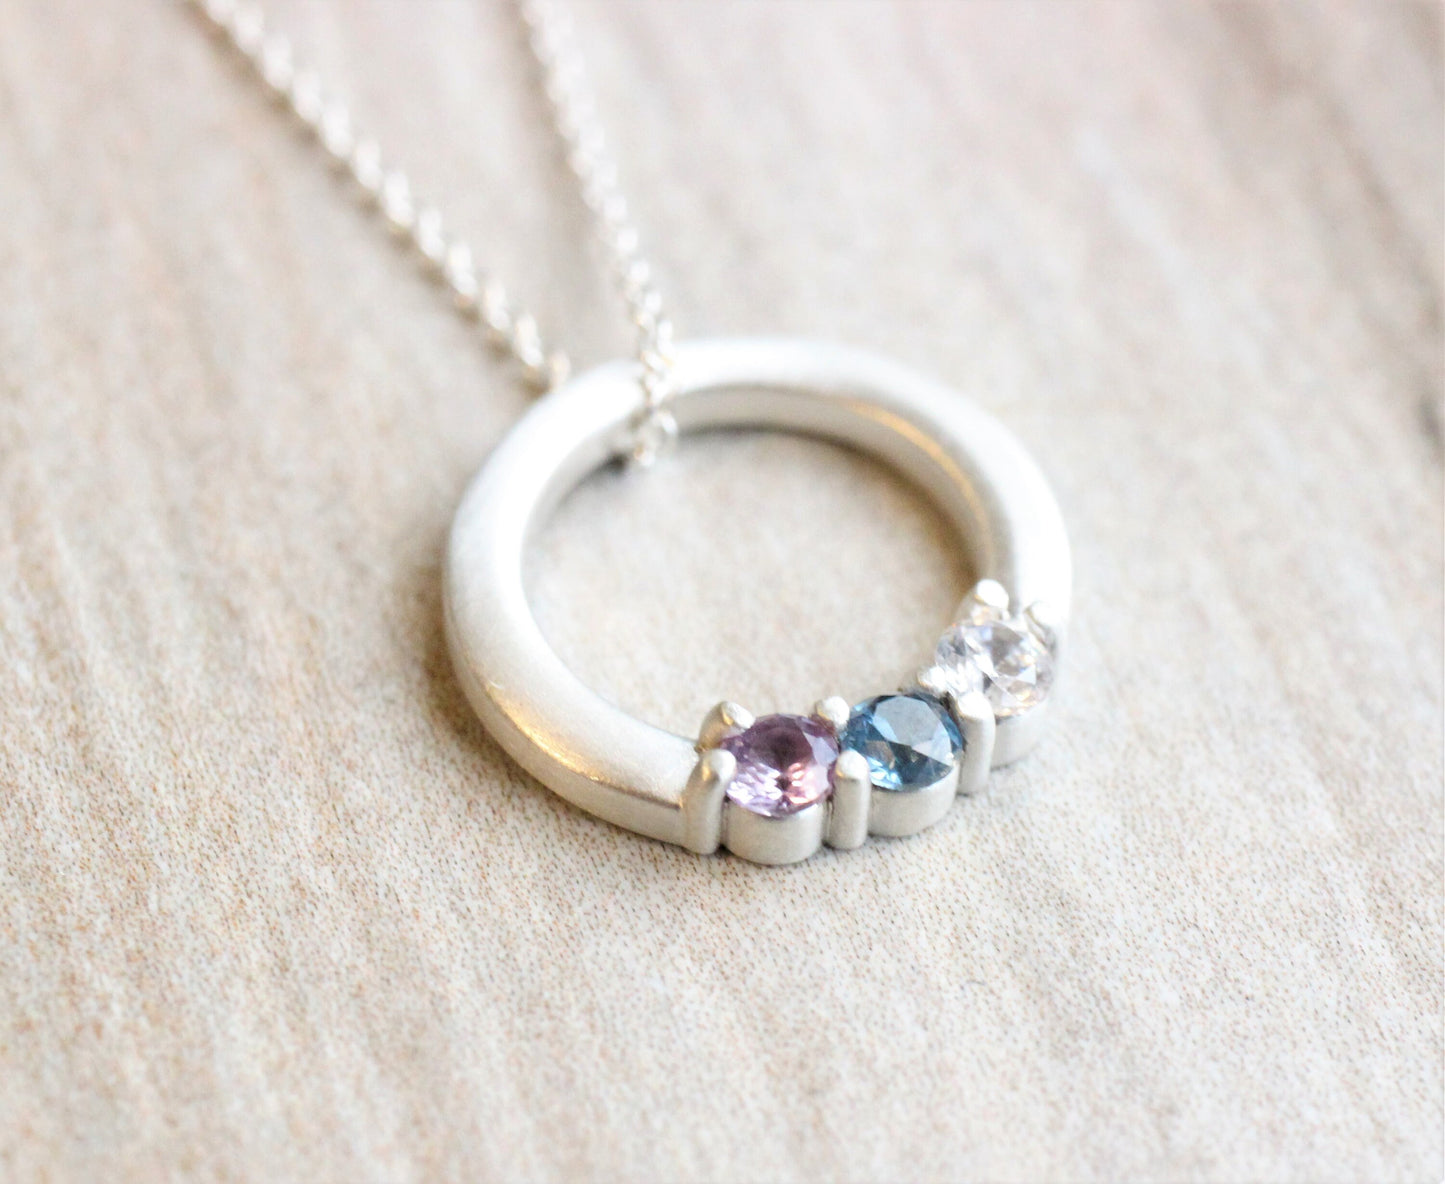 Family Birthstone Necklace // Satin Finish Sterling Silver or Solid Gold Circle Gemstone Personalized Necklace // Custom Pendant Mother's